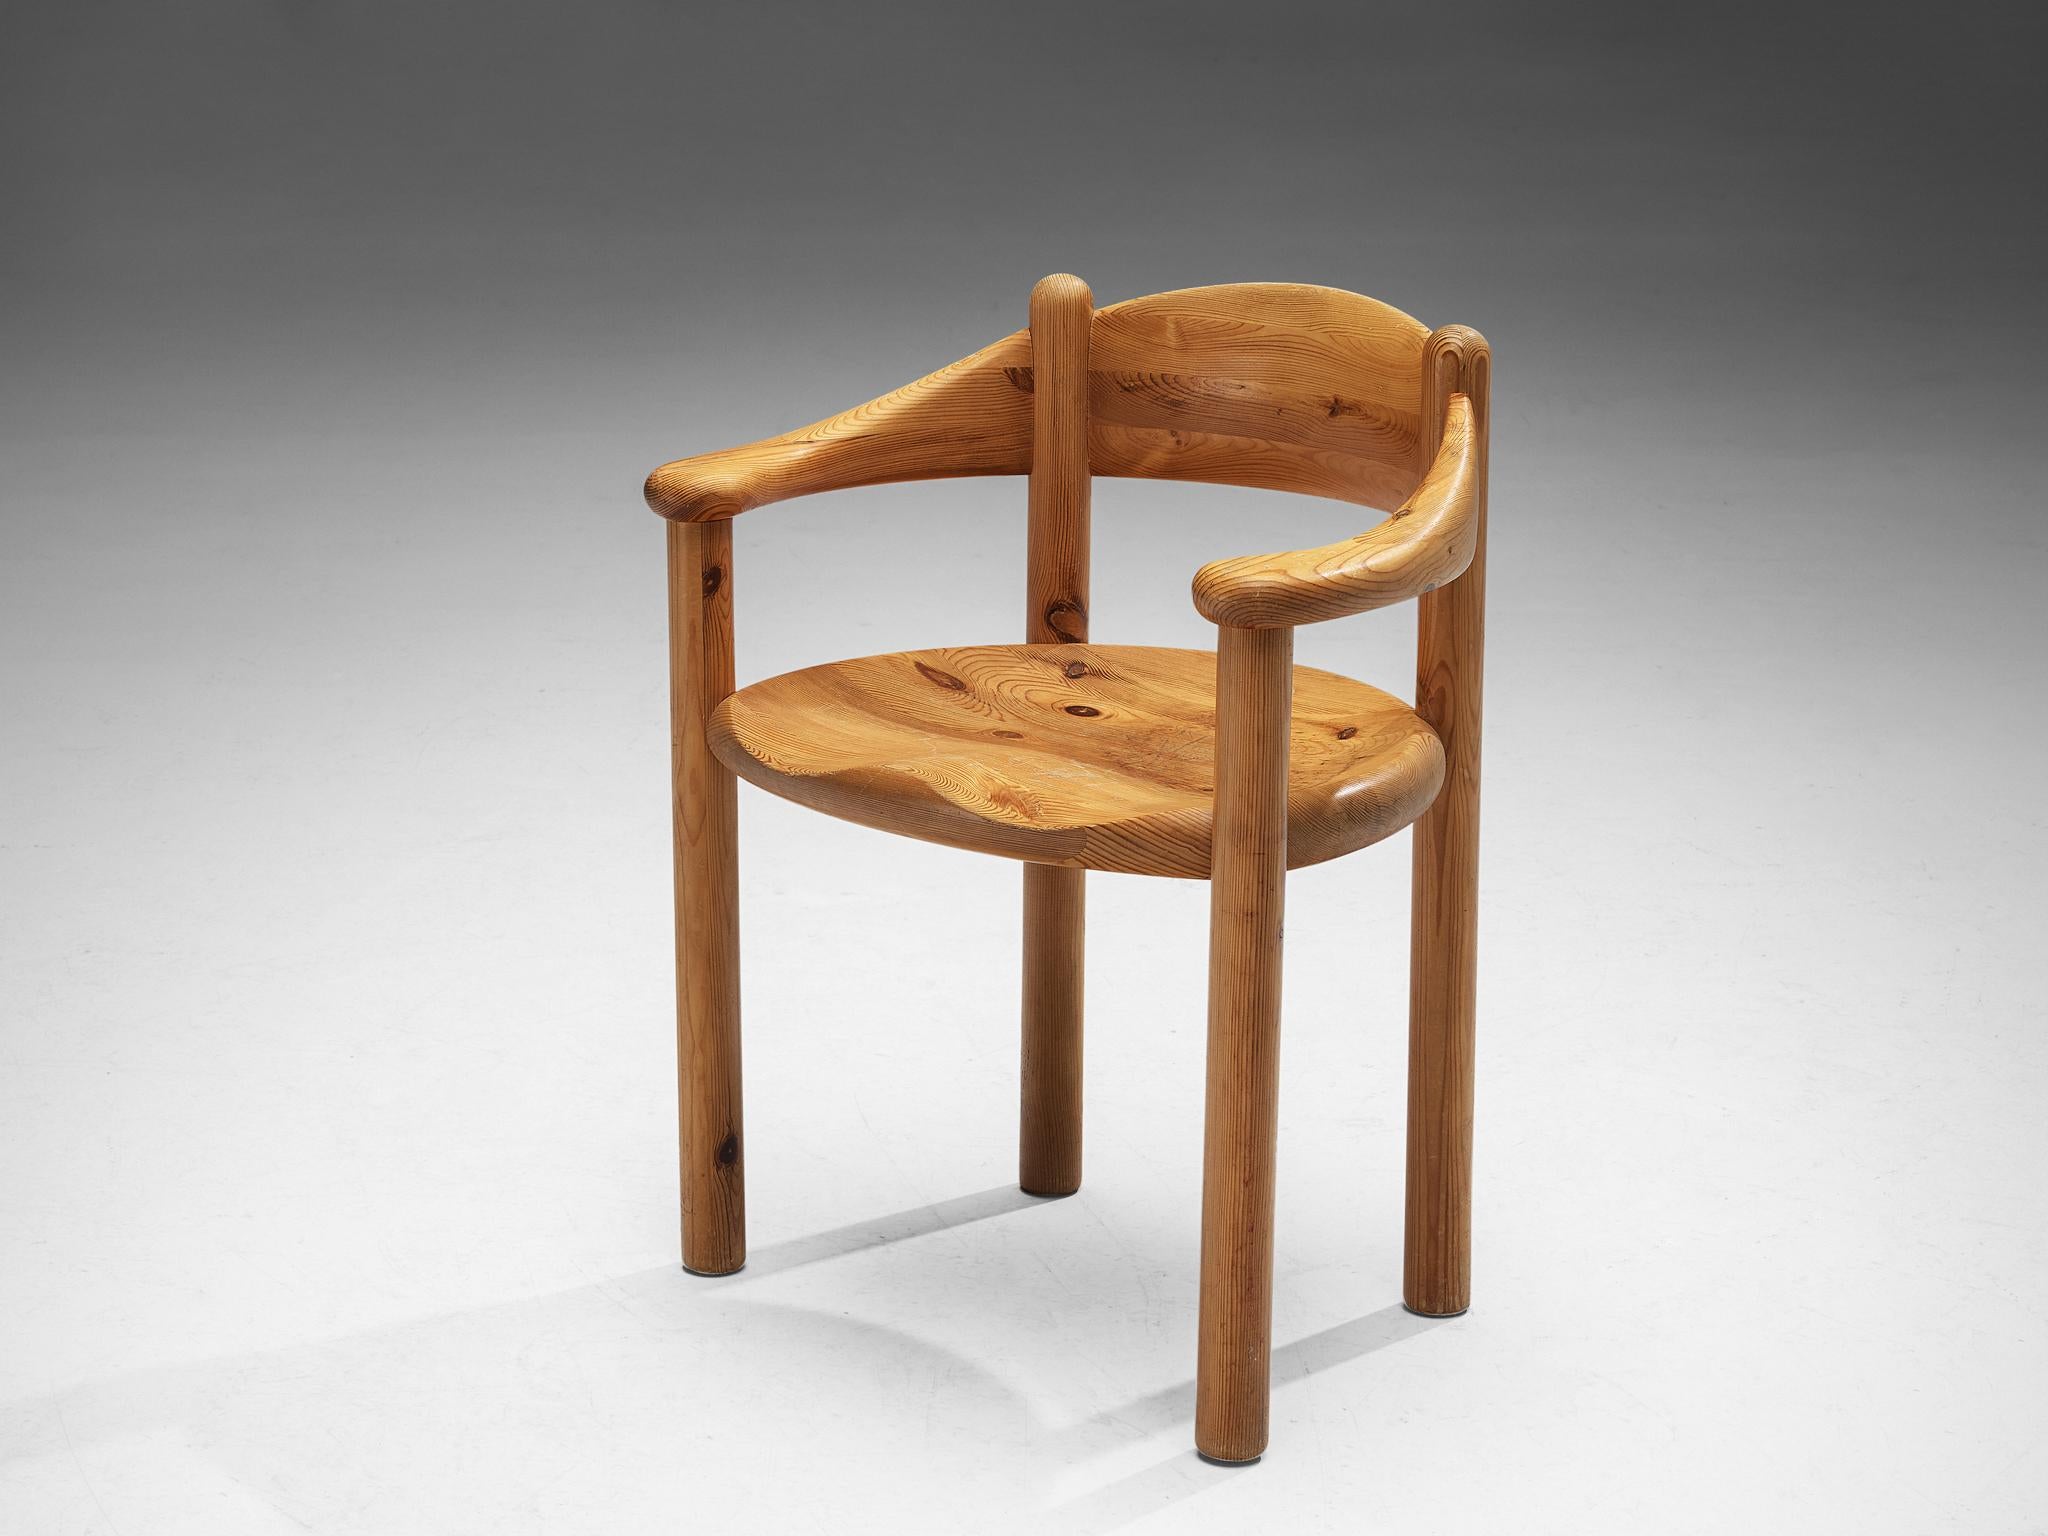 Rainer Daumiller, armchair, pine, Denmark, 1970s.

Beautiful organic and natural armchair in solid pine. A simplistic design with a round seating and full attention for the natural expression and grain of the wood. The slender curved backrest of